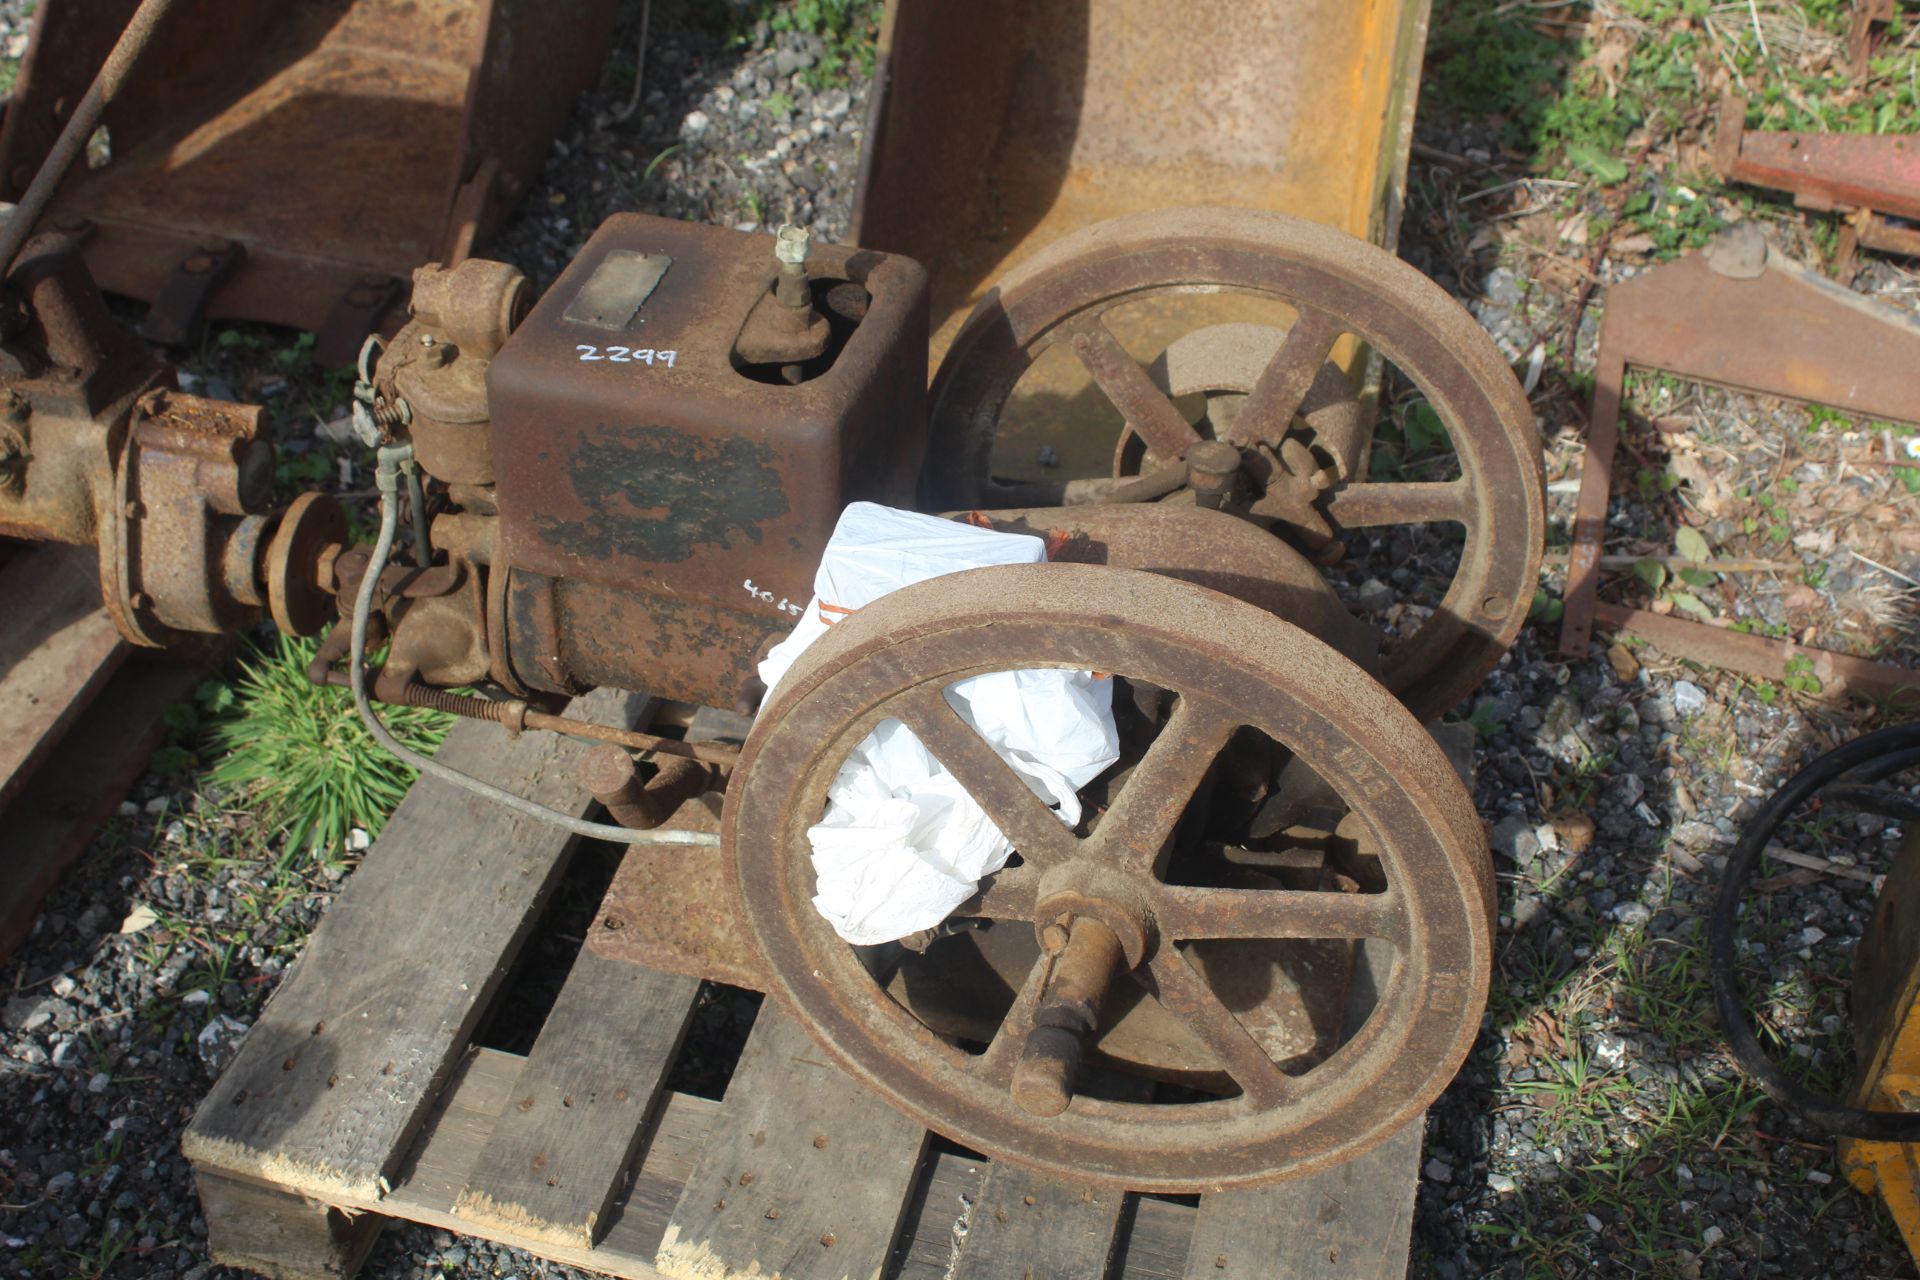 Stationary engine. For spares or repair.